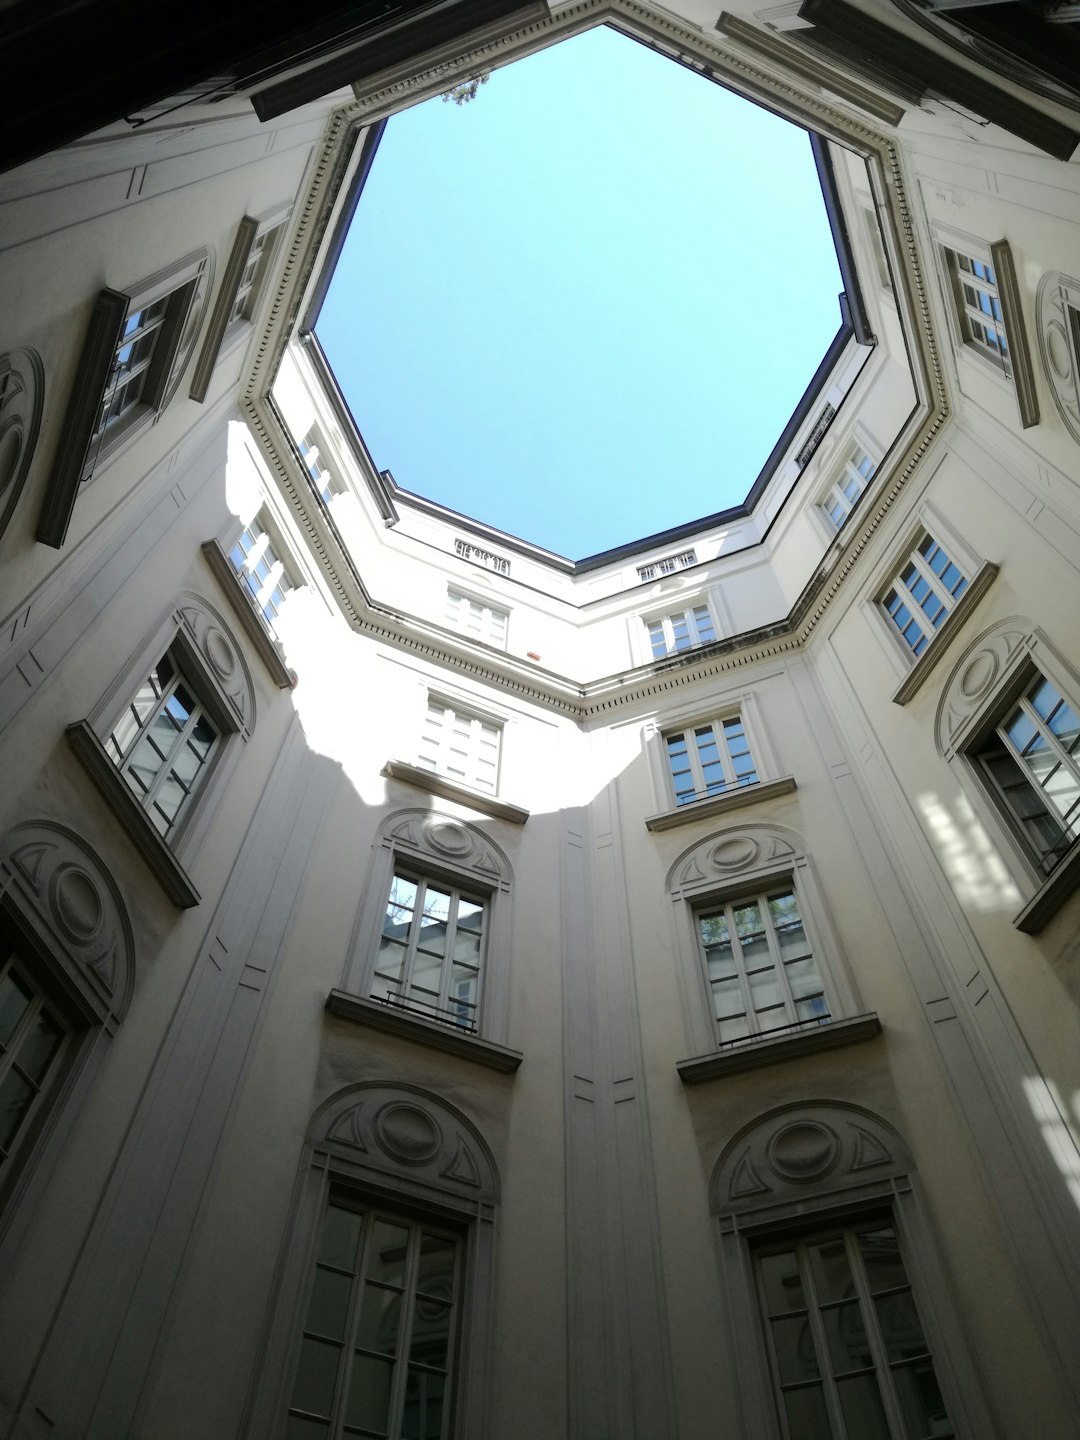  angle view of white painted building under blue sky courtyard forecourt